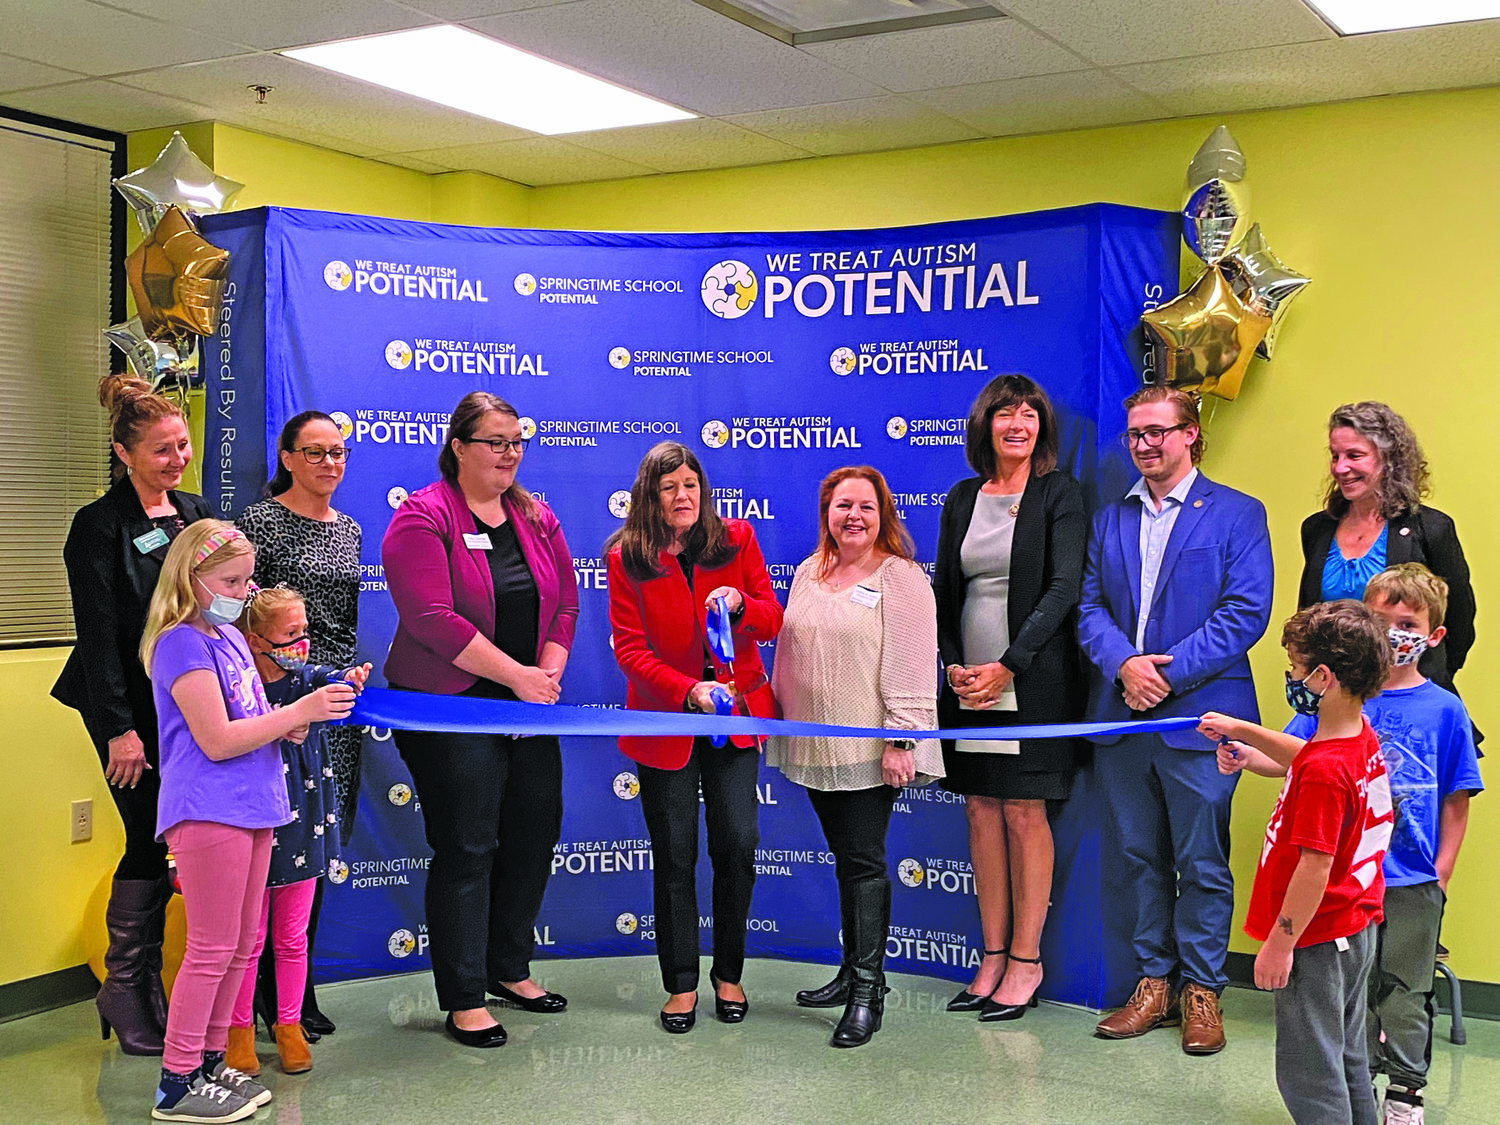 Government officials and members of the Central and Lower Bucks Chambers of Commerce joined Potential staff members in cutting the ribbon and opening its new Warminster center. From left are: Lower Bucks Chamber of Commerce representative Anna Bogiatzis, state Rep. Meghan Schroeder, Potential Donor Relationship Manager Hillary Sawyer, Central Bucks Chamber of Commerce representative Deborah Wagner, Potential founder, President and CEO Kristine Quinby, state Rep. Wendi Thomas, Kevin Bongarzone on behalf of U.S. Rep. Brian Fitzpatrick, and Donna Elms on behalf of state Sen. Maria Collett. Holding the ribbon are some  little helpers in attendance.